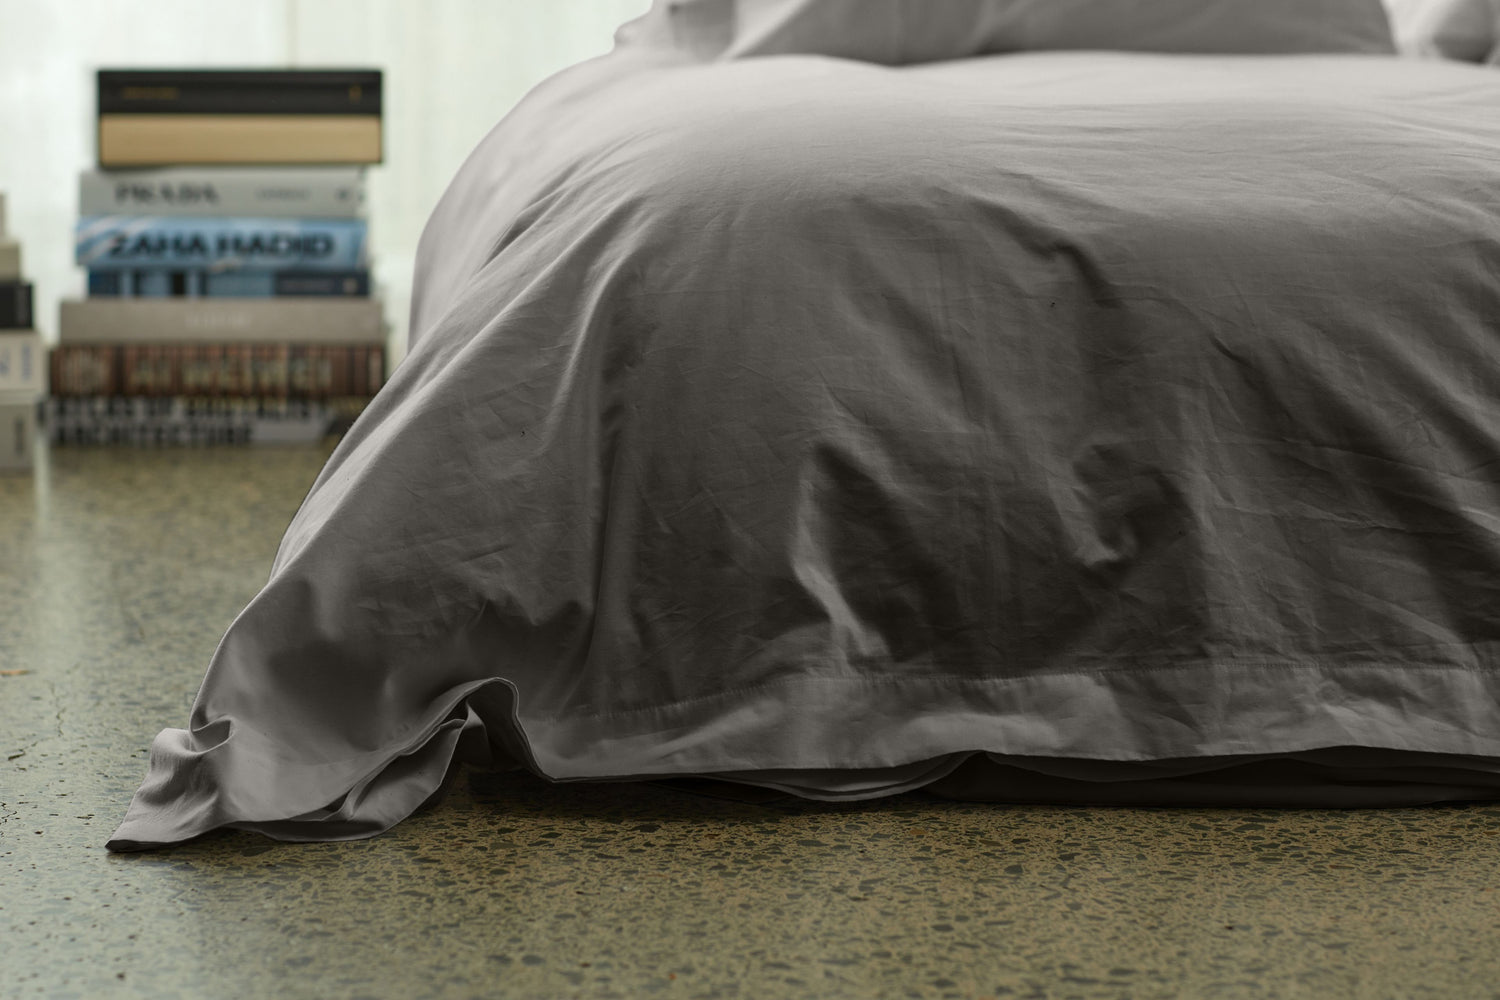 Stone Percale Duvet Cover + Pillowcases | 100% Organic Certified Cotton